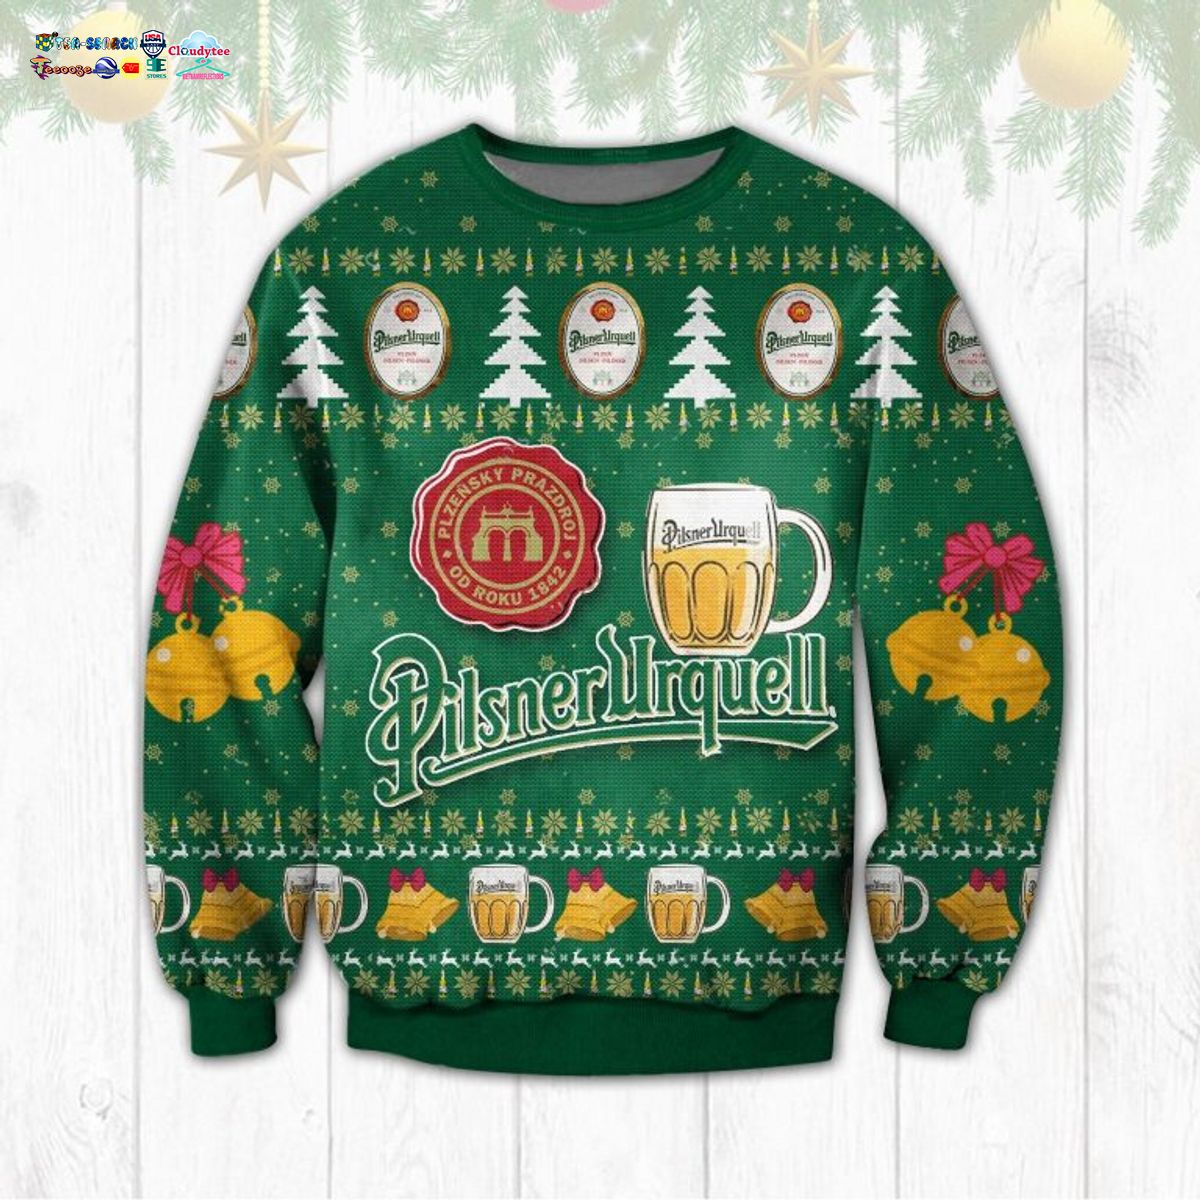 Pilsner Urquell Ugly Christmas Sweater - Our hard working soul